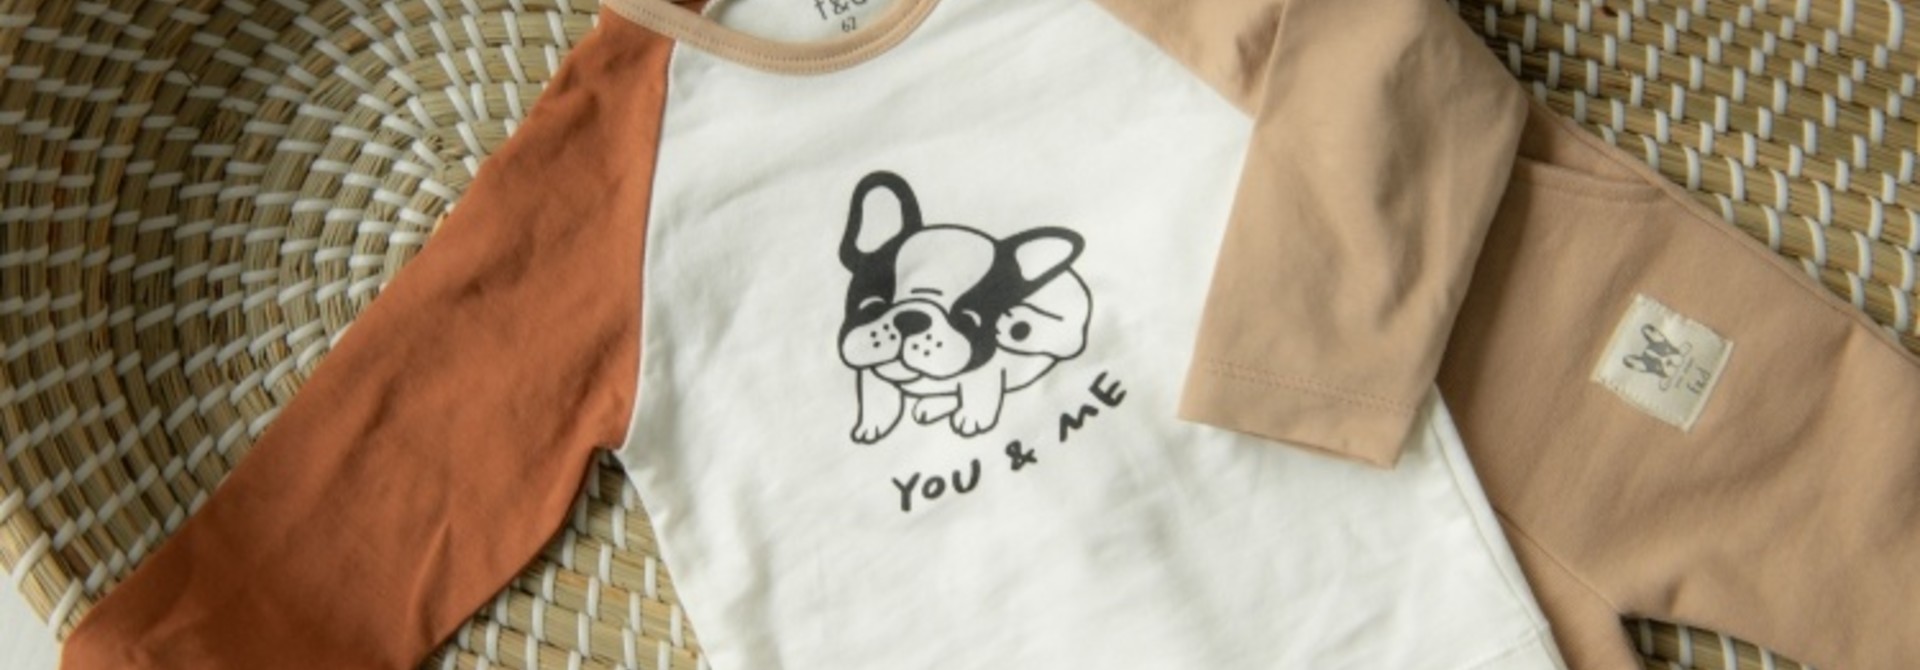 Frogs&Dogs - Playtime shirt you & me